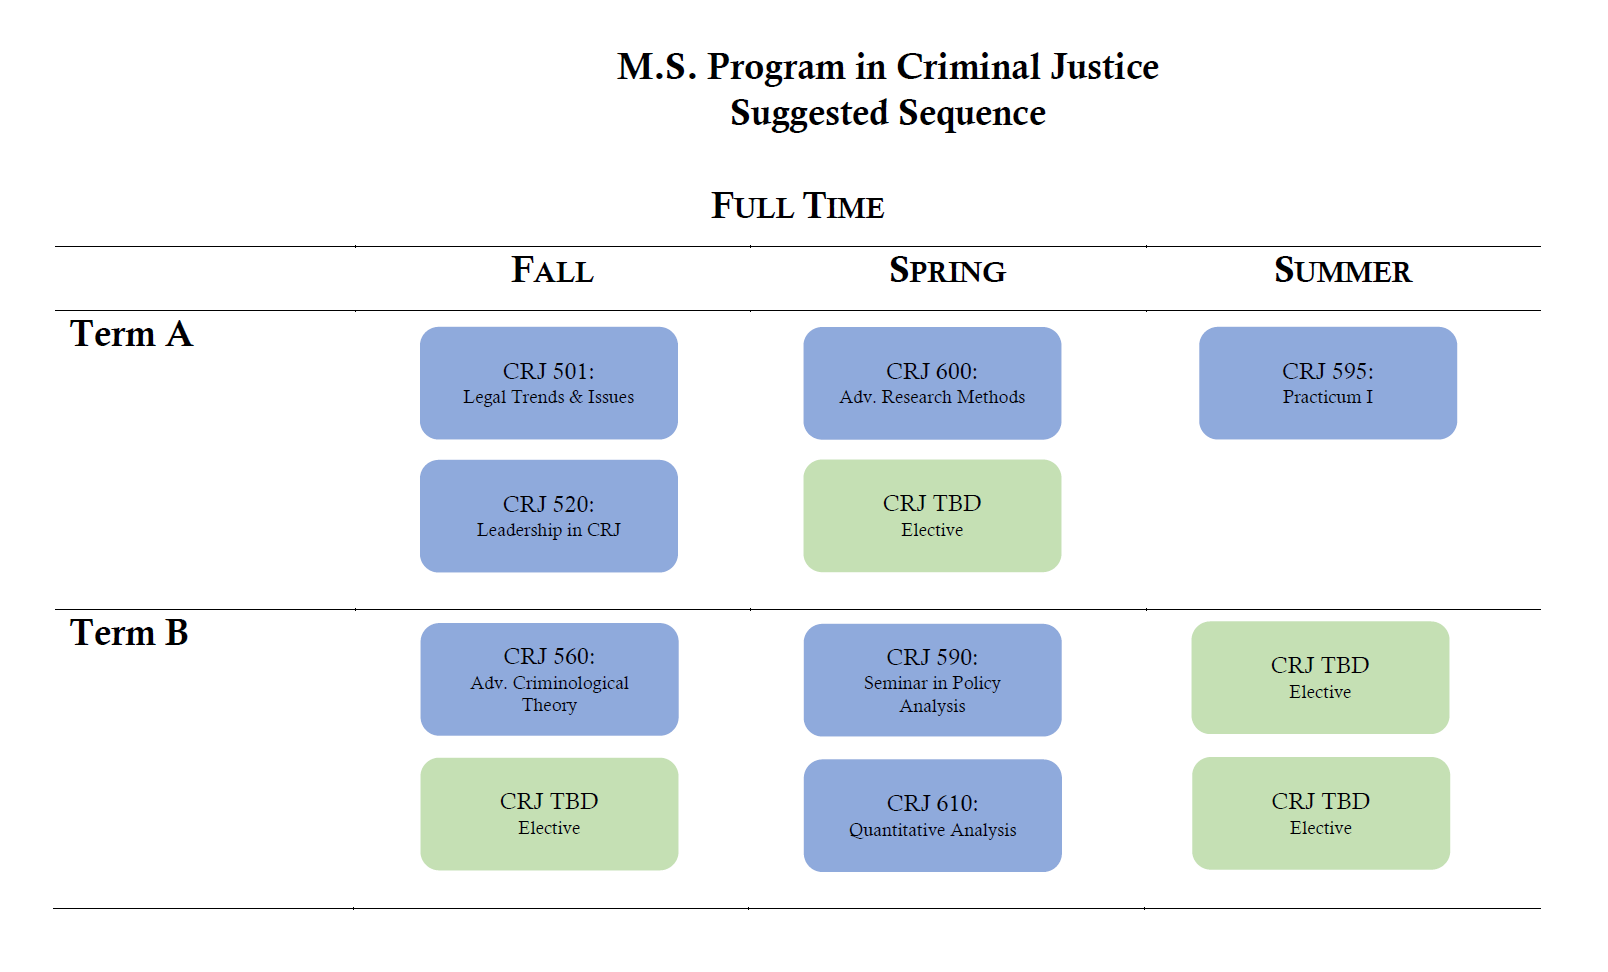 MS Program in Criminal Justice suggested sequence